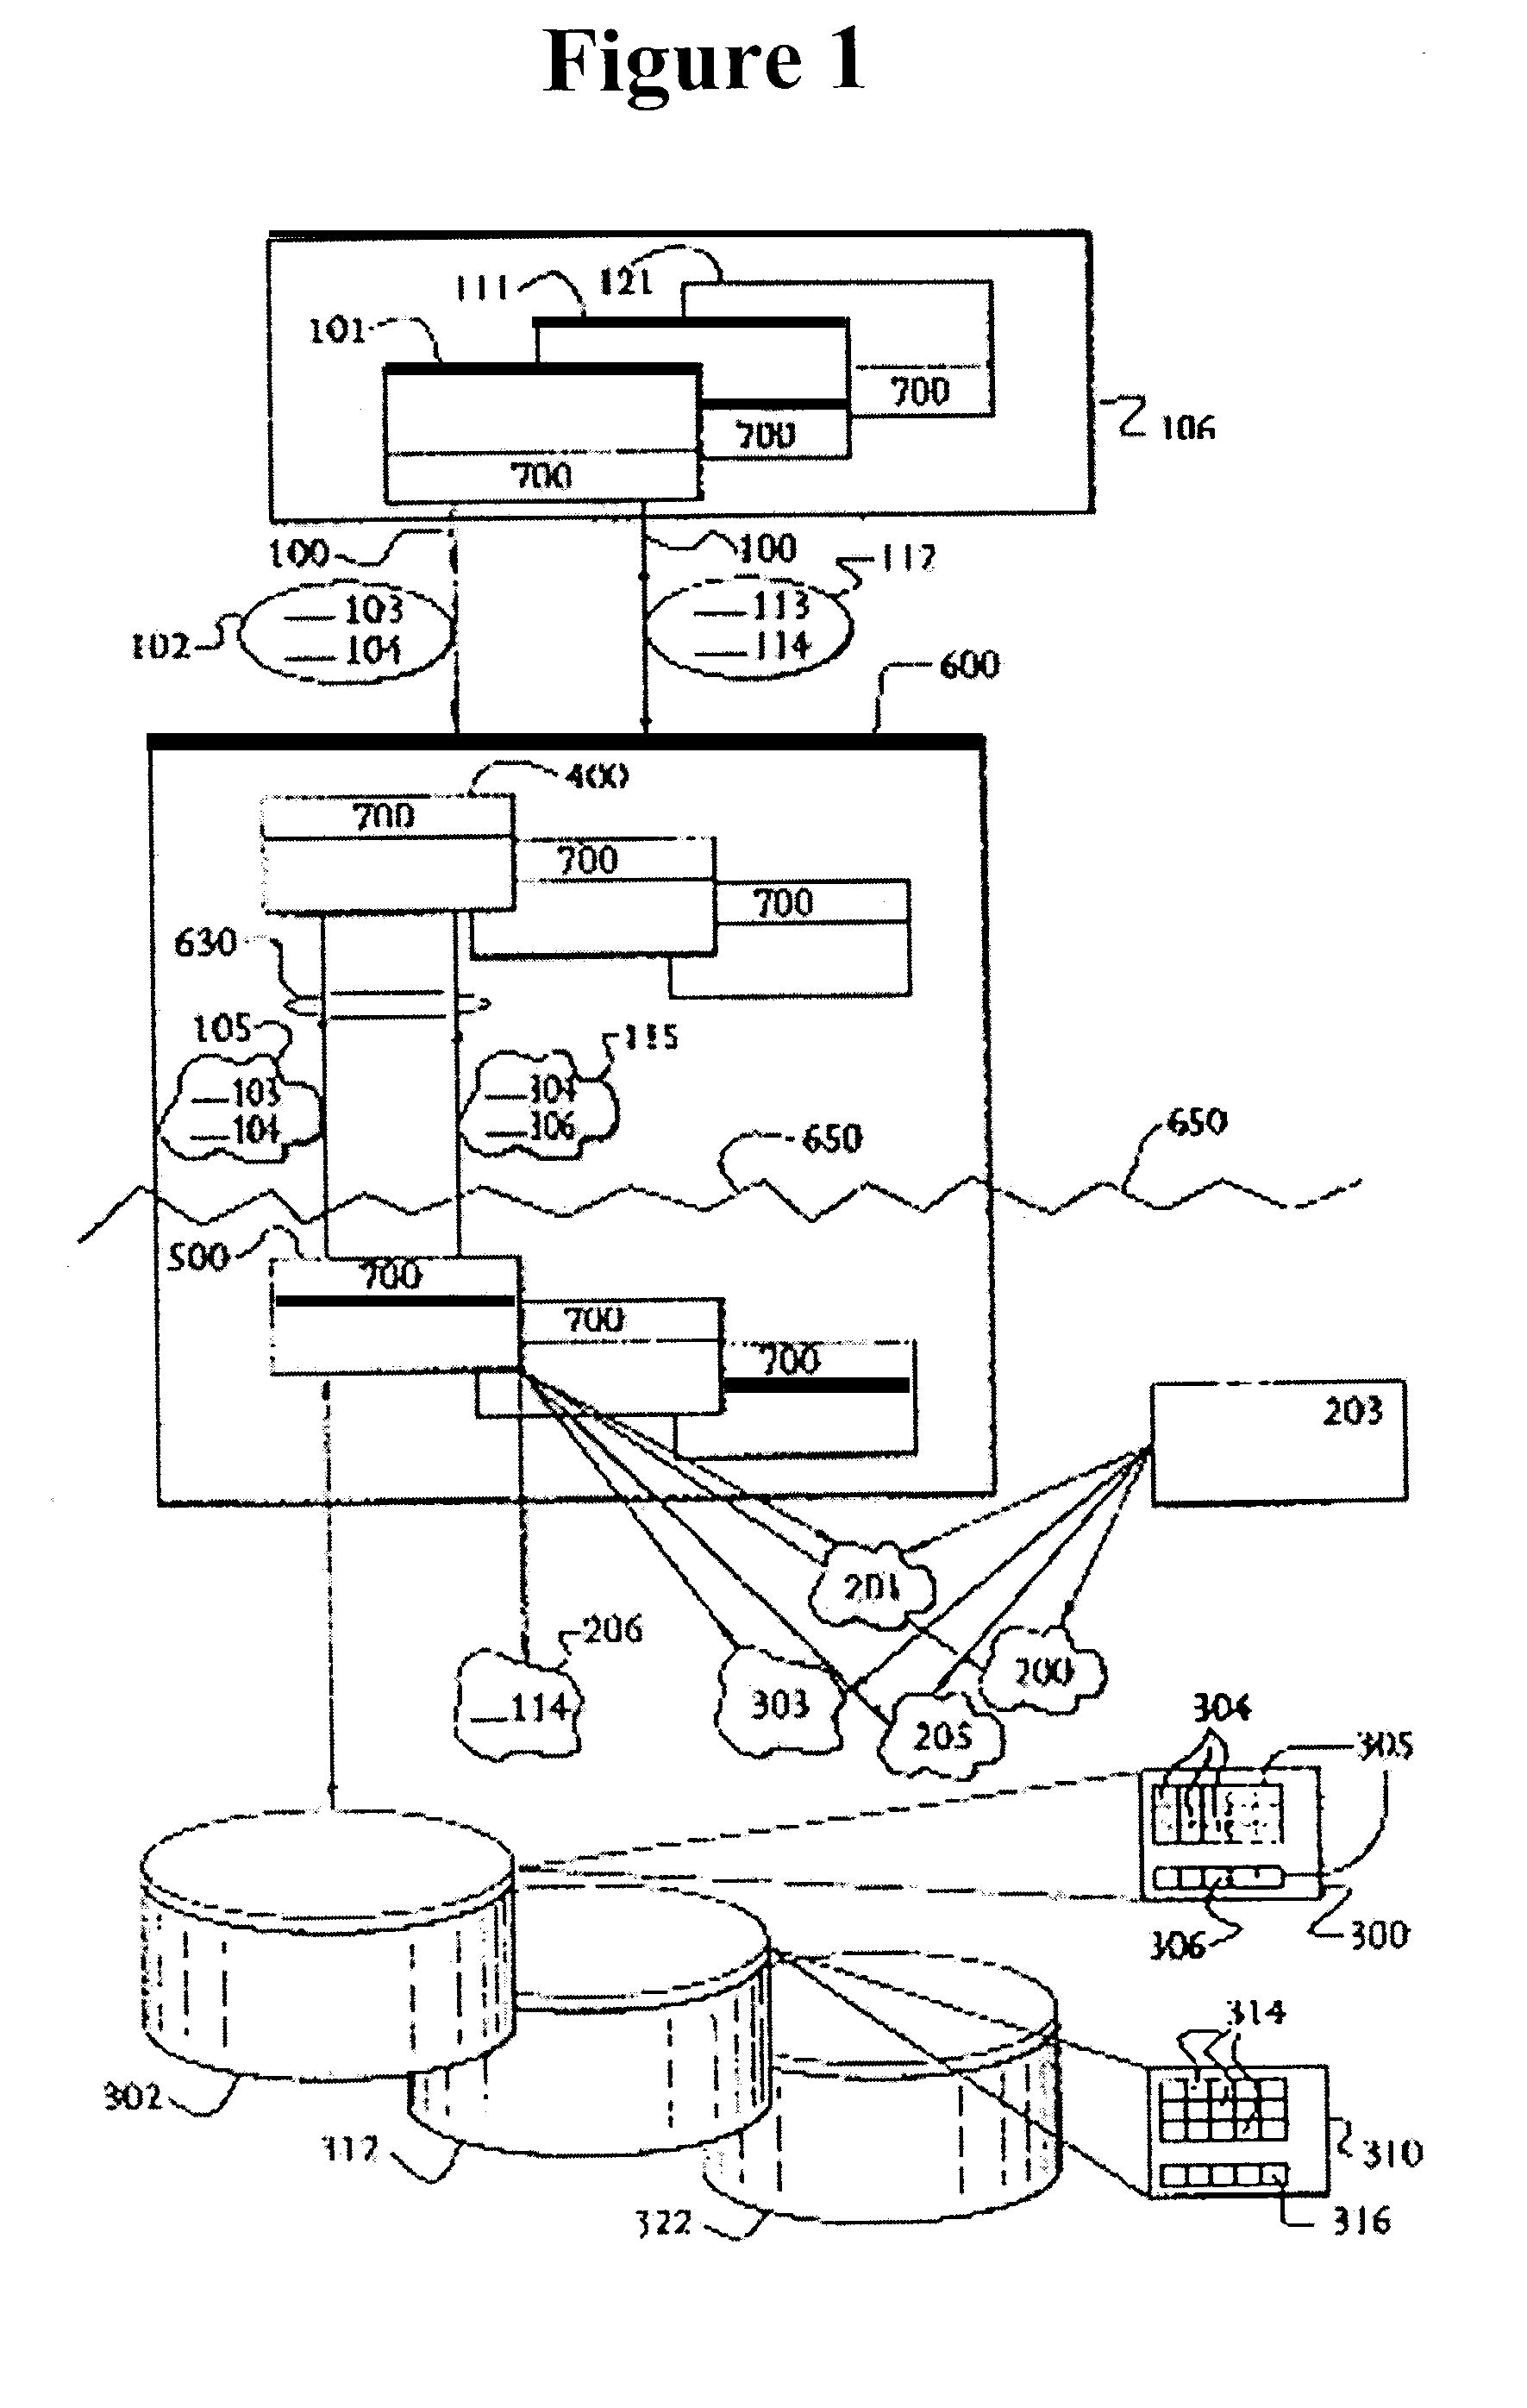 Dynamic class inheritance and distributed caching with object relational mapping and cartesian model support in a database manipulation and mapping system